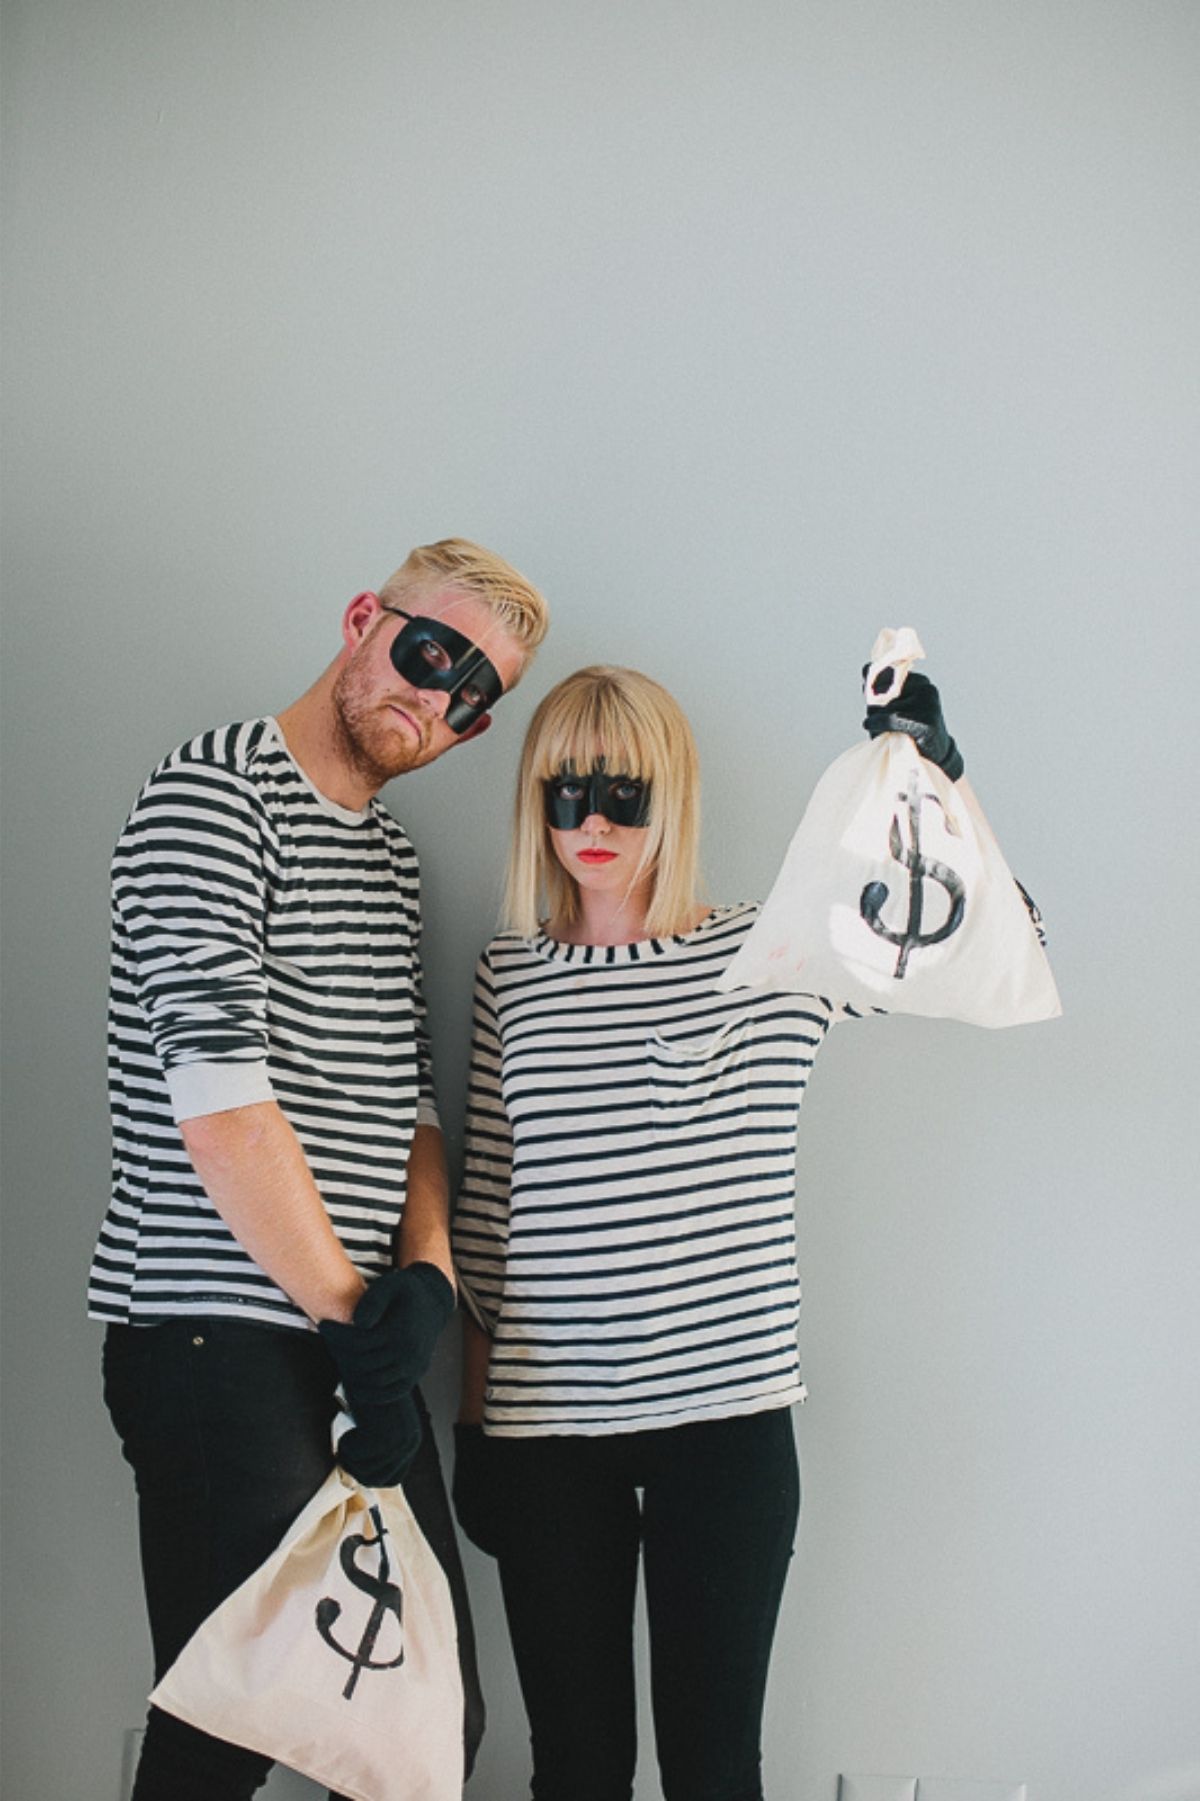 Say Yes blog dressed up as a robber couples costume